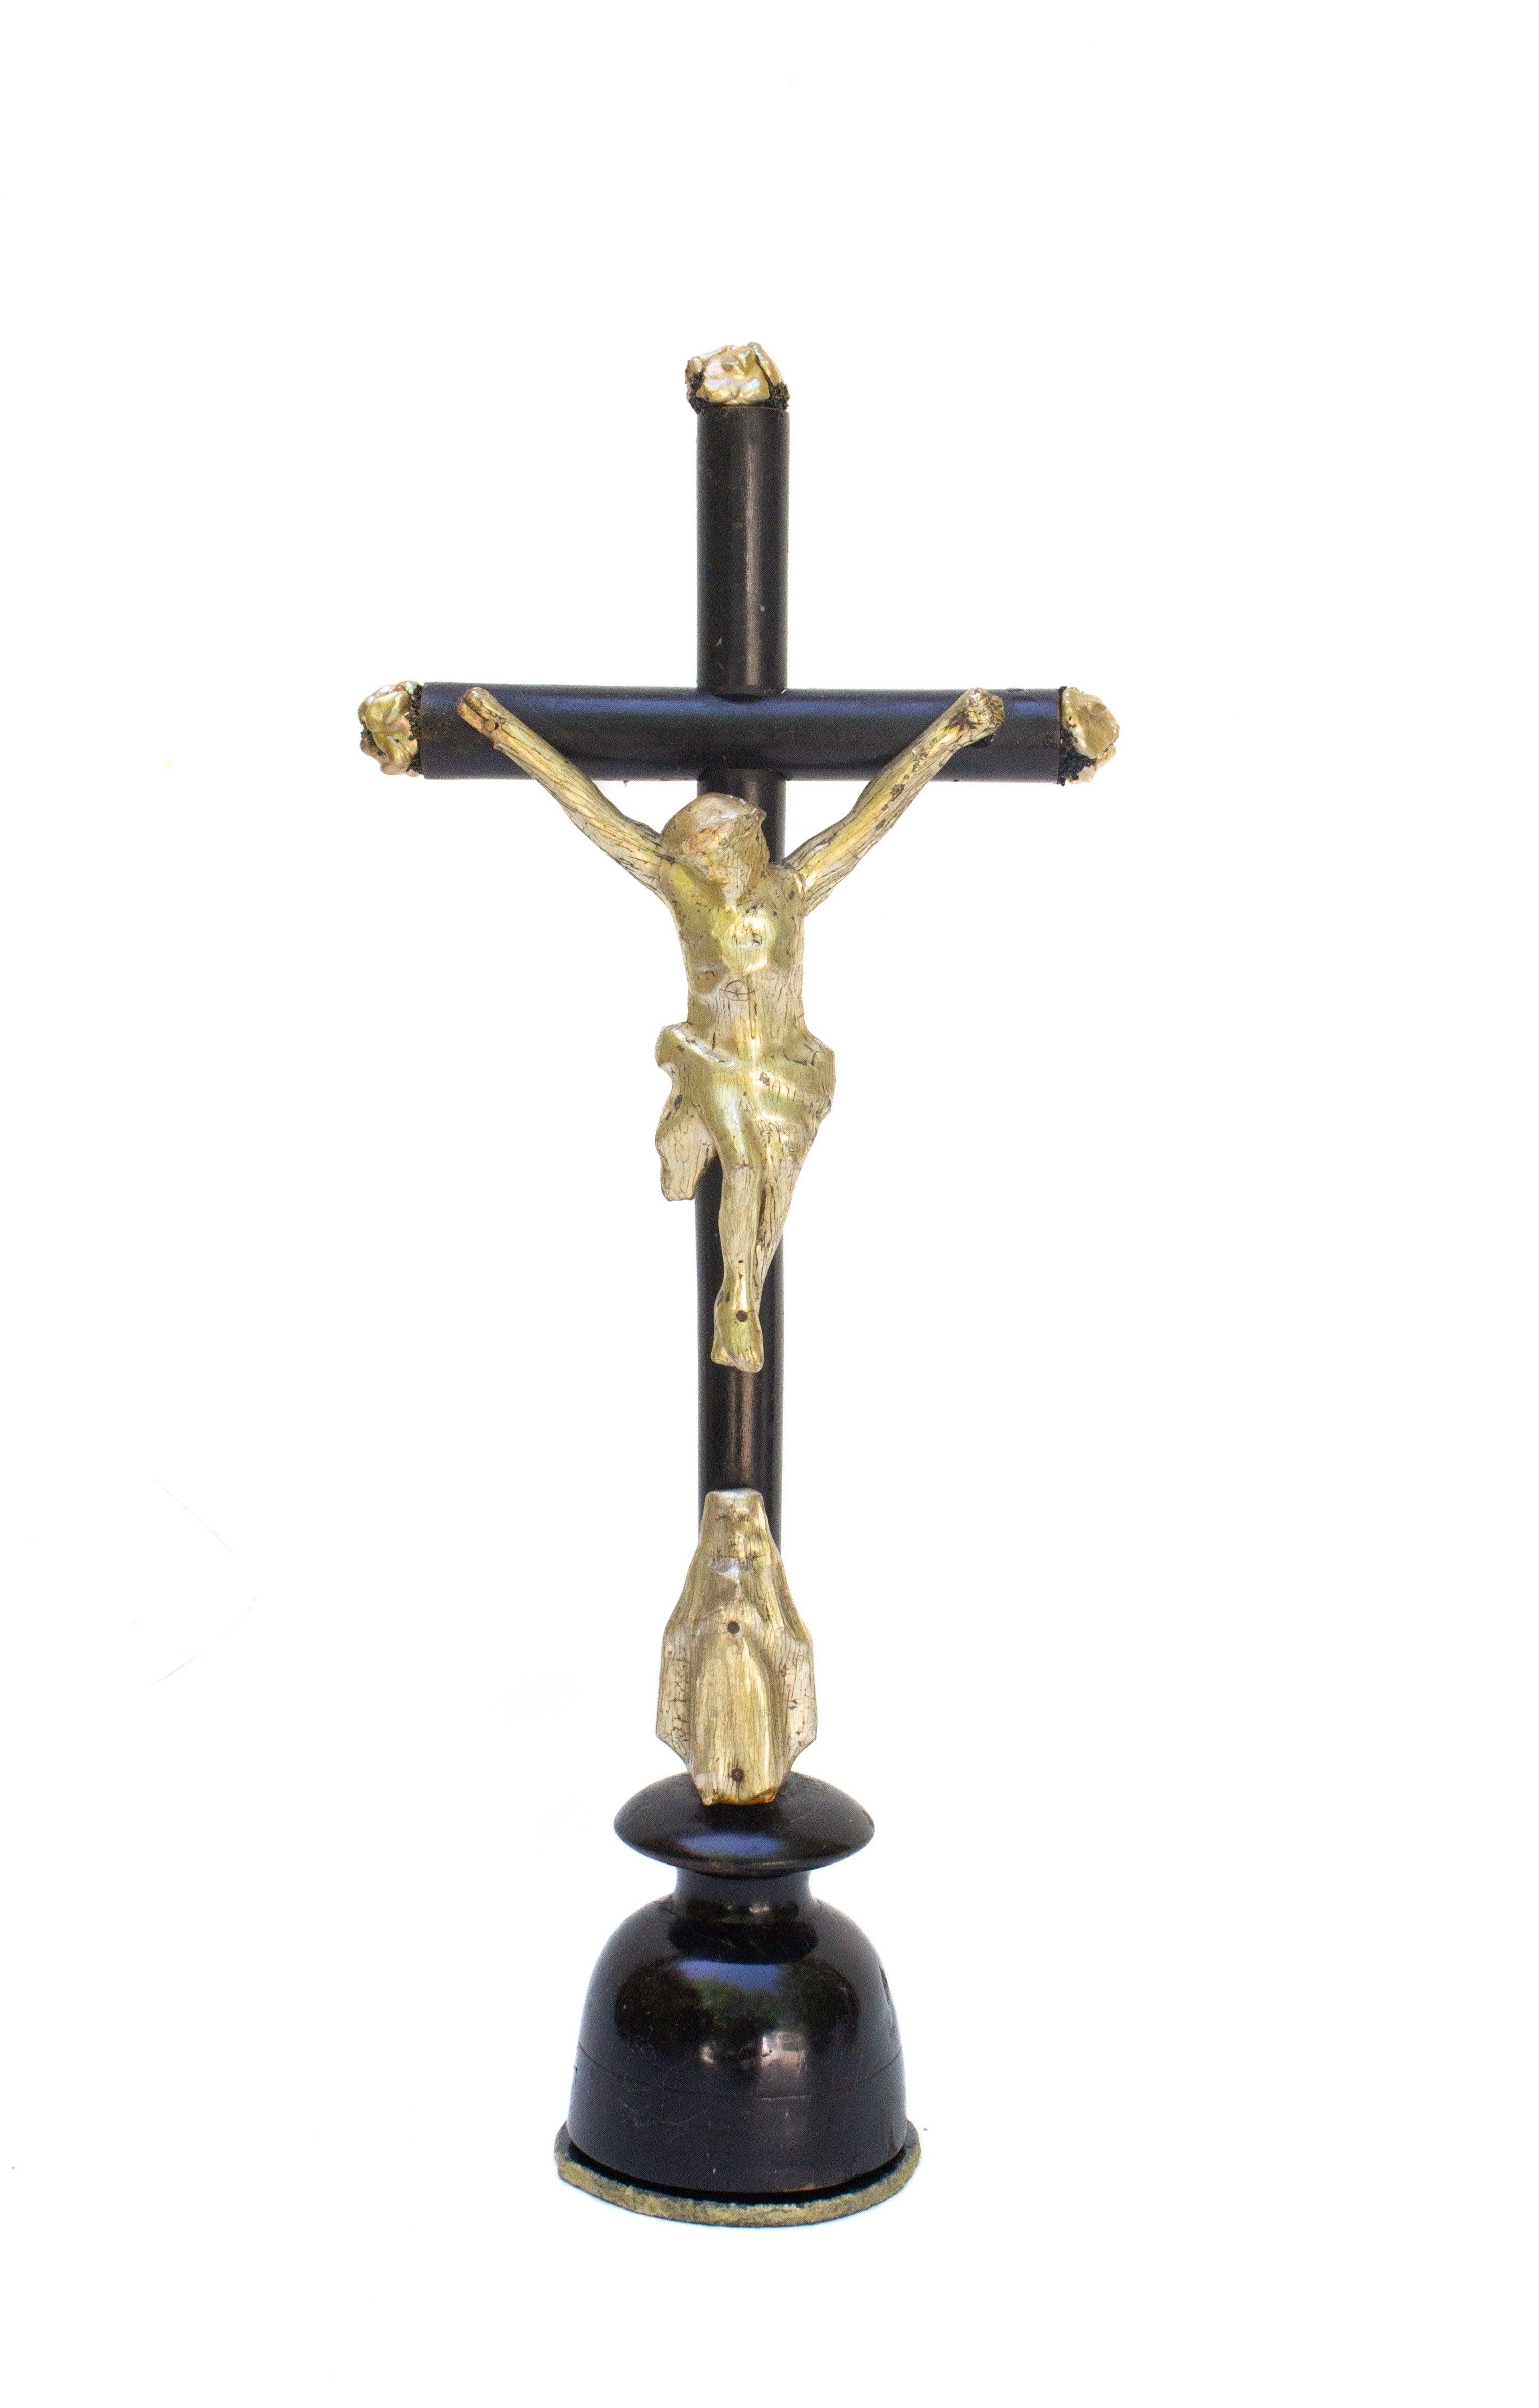 19th century Italian black crucifix with a gold and pearlescent figure of Christ and Mary. It is adorned with baroque pearls and mounted on an agate slice. This figure of Christ is unique as it depicts Mary below Christ which is uncommon among